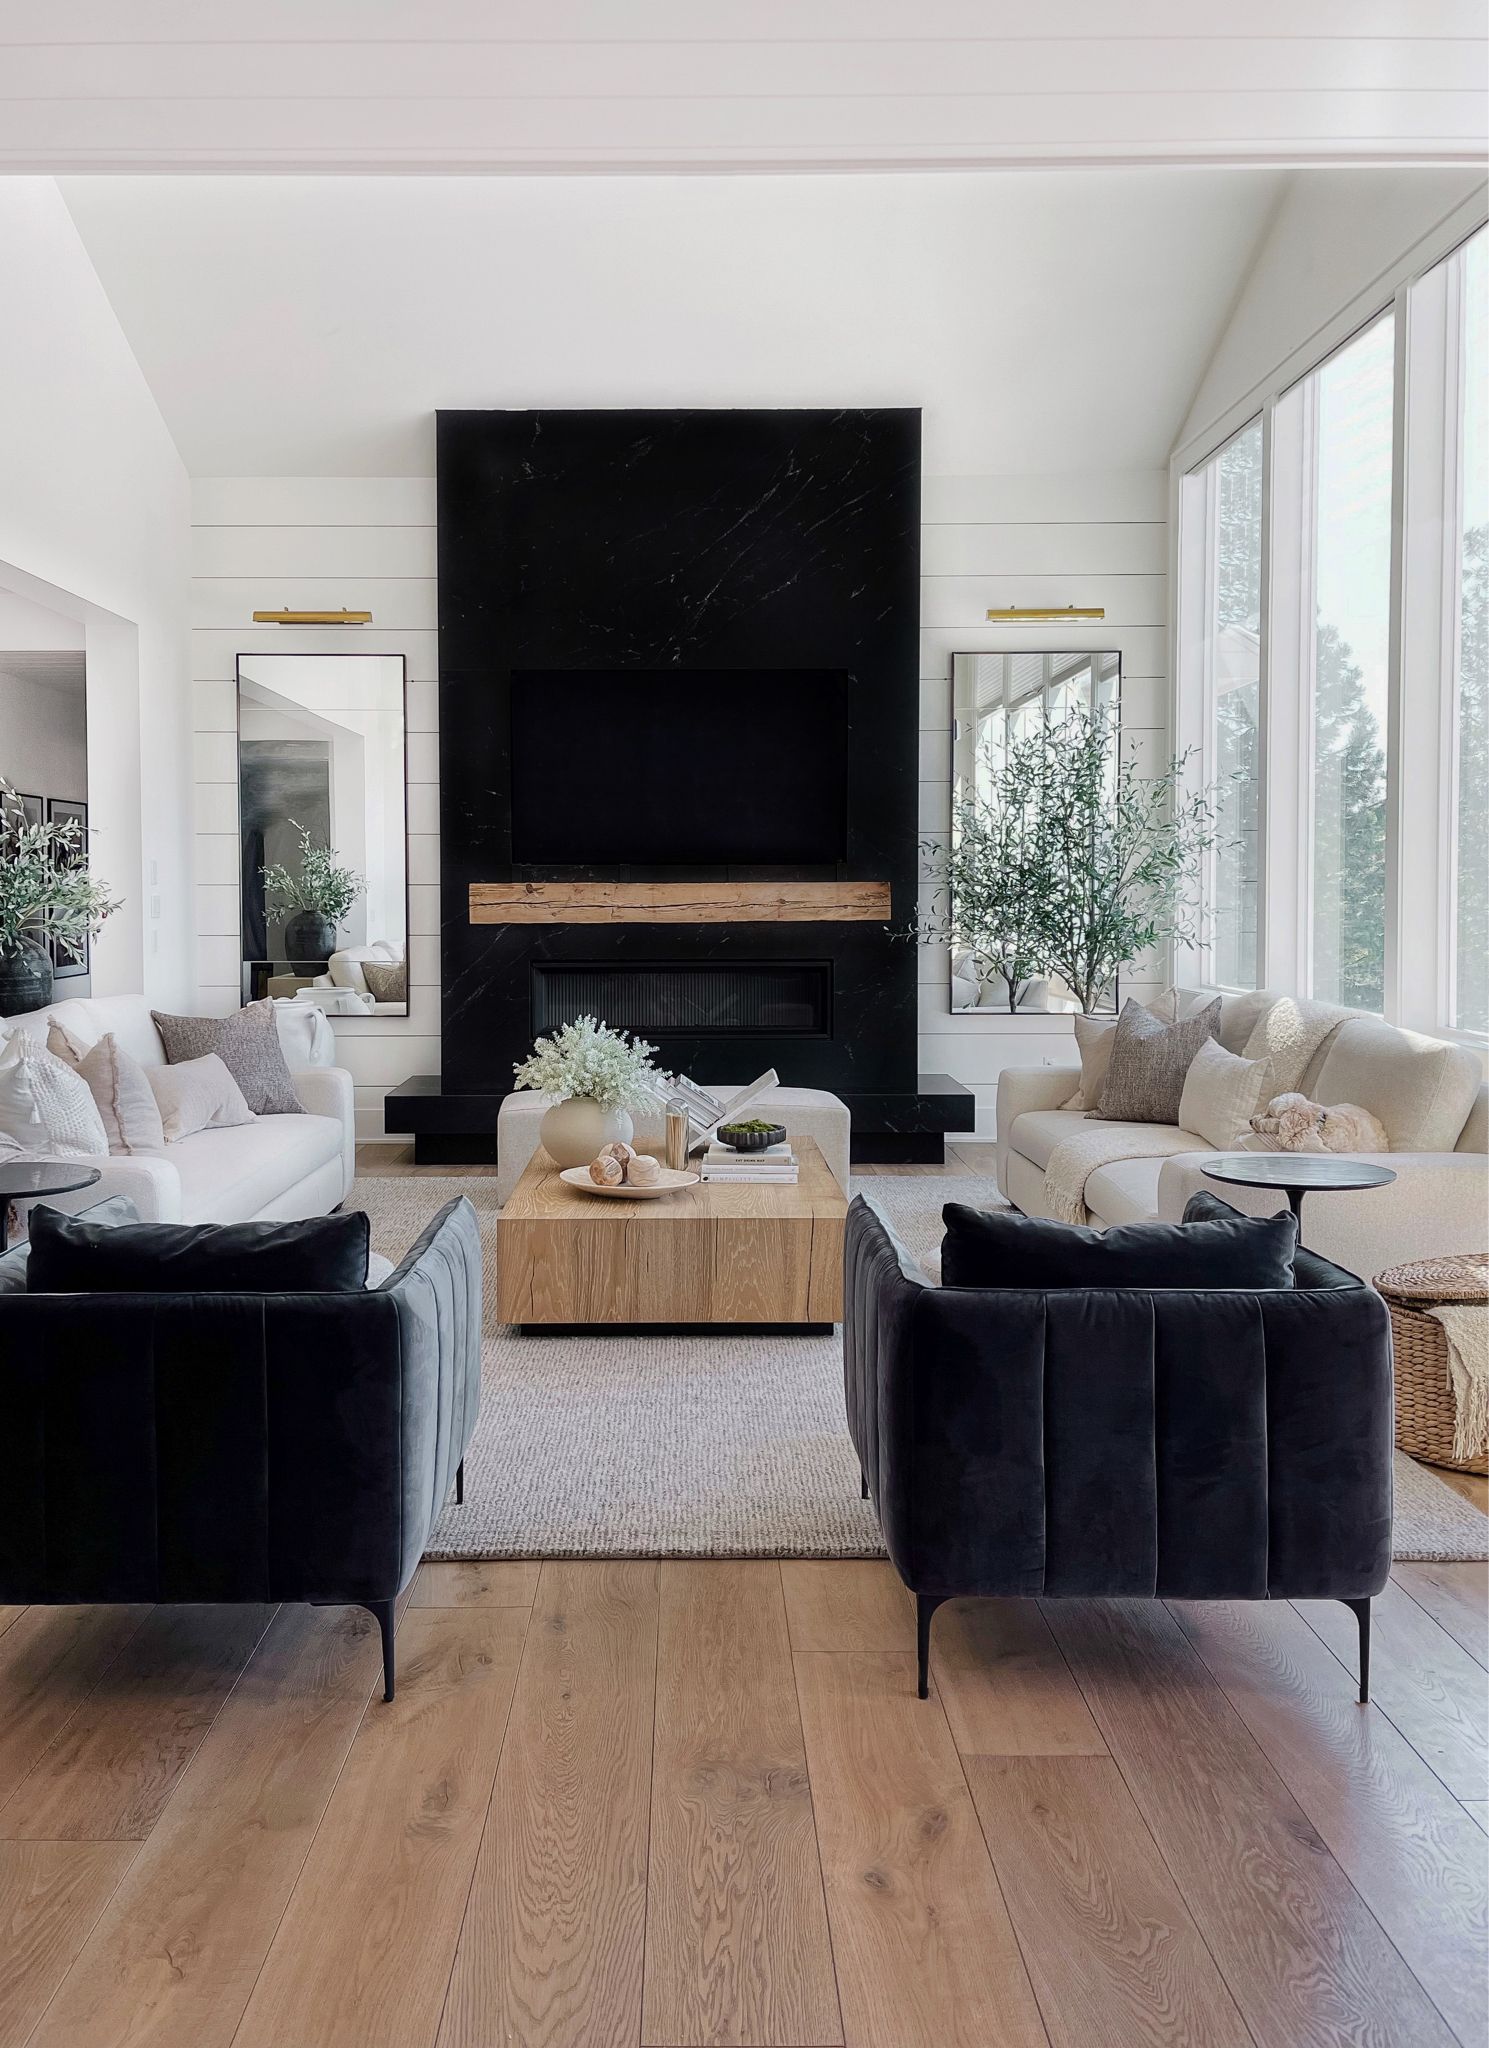 Choosing sophiscated and elegant colour
like black and white living room